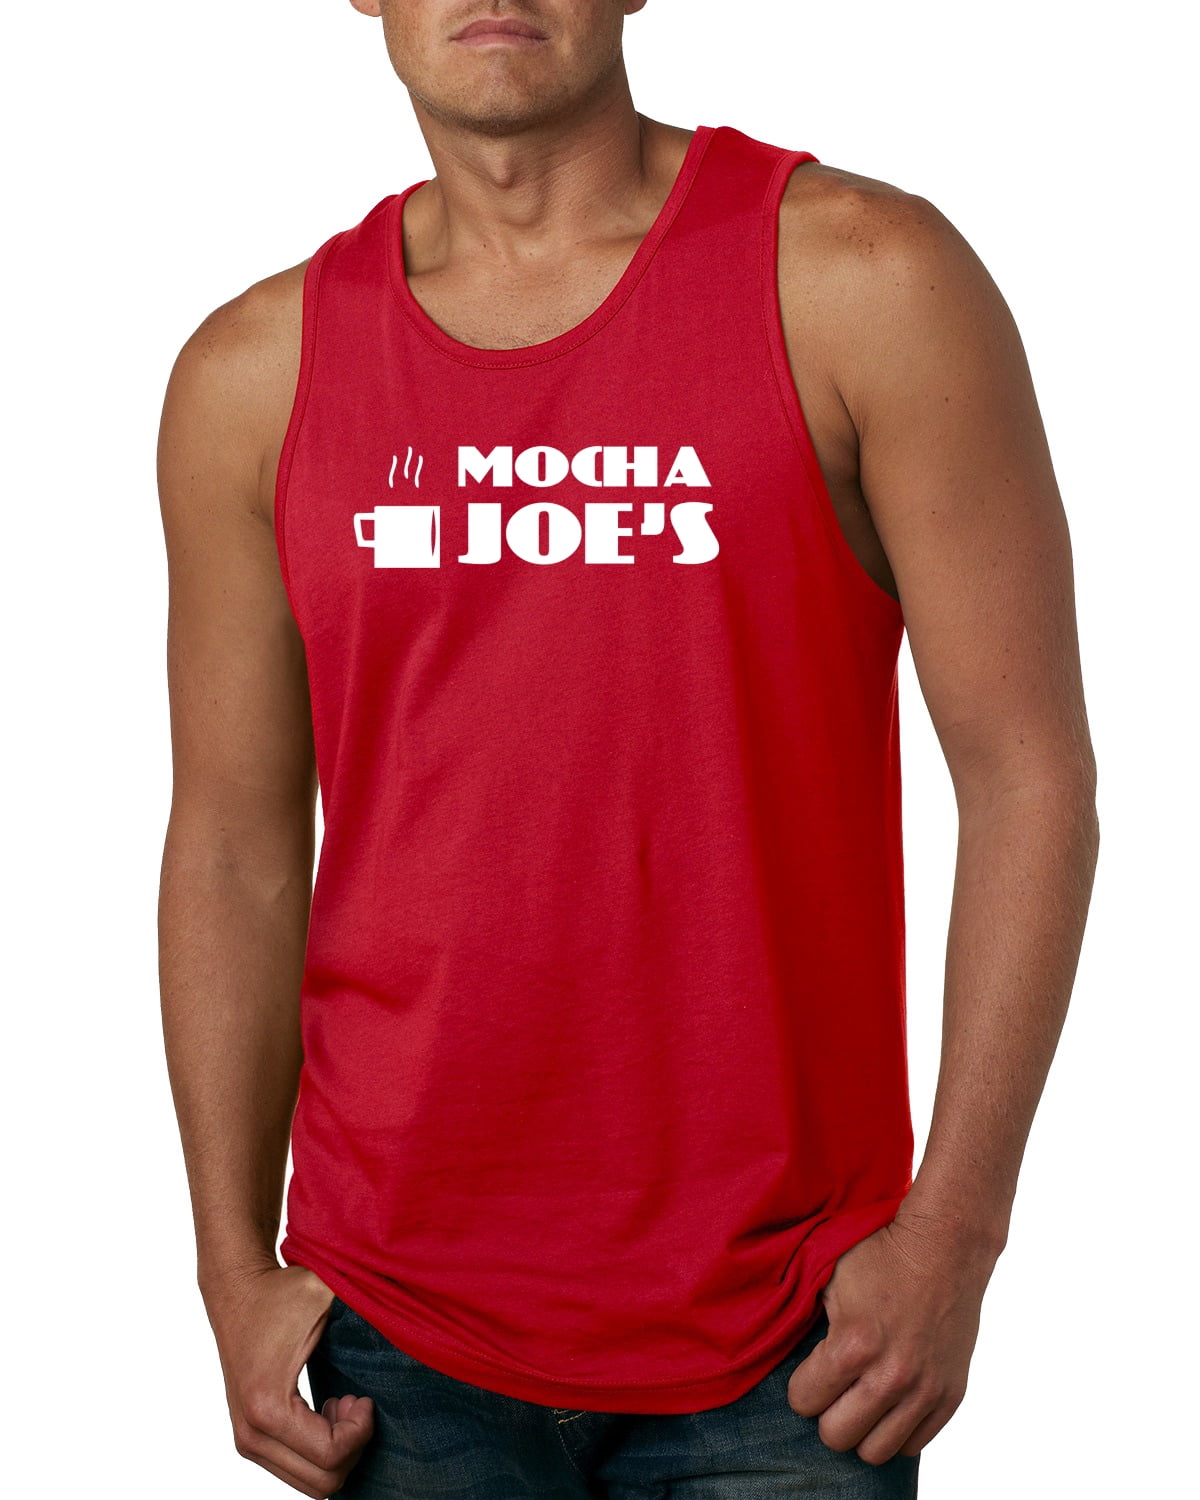 Joes USA Custom Graphic Tank Tops in Sizes S-4XL